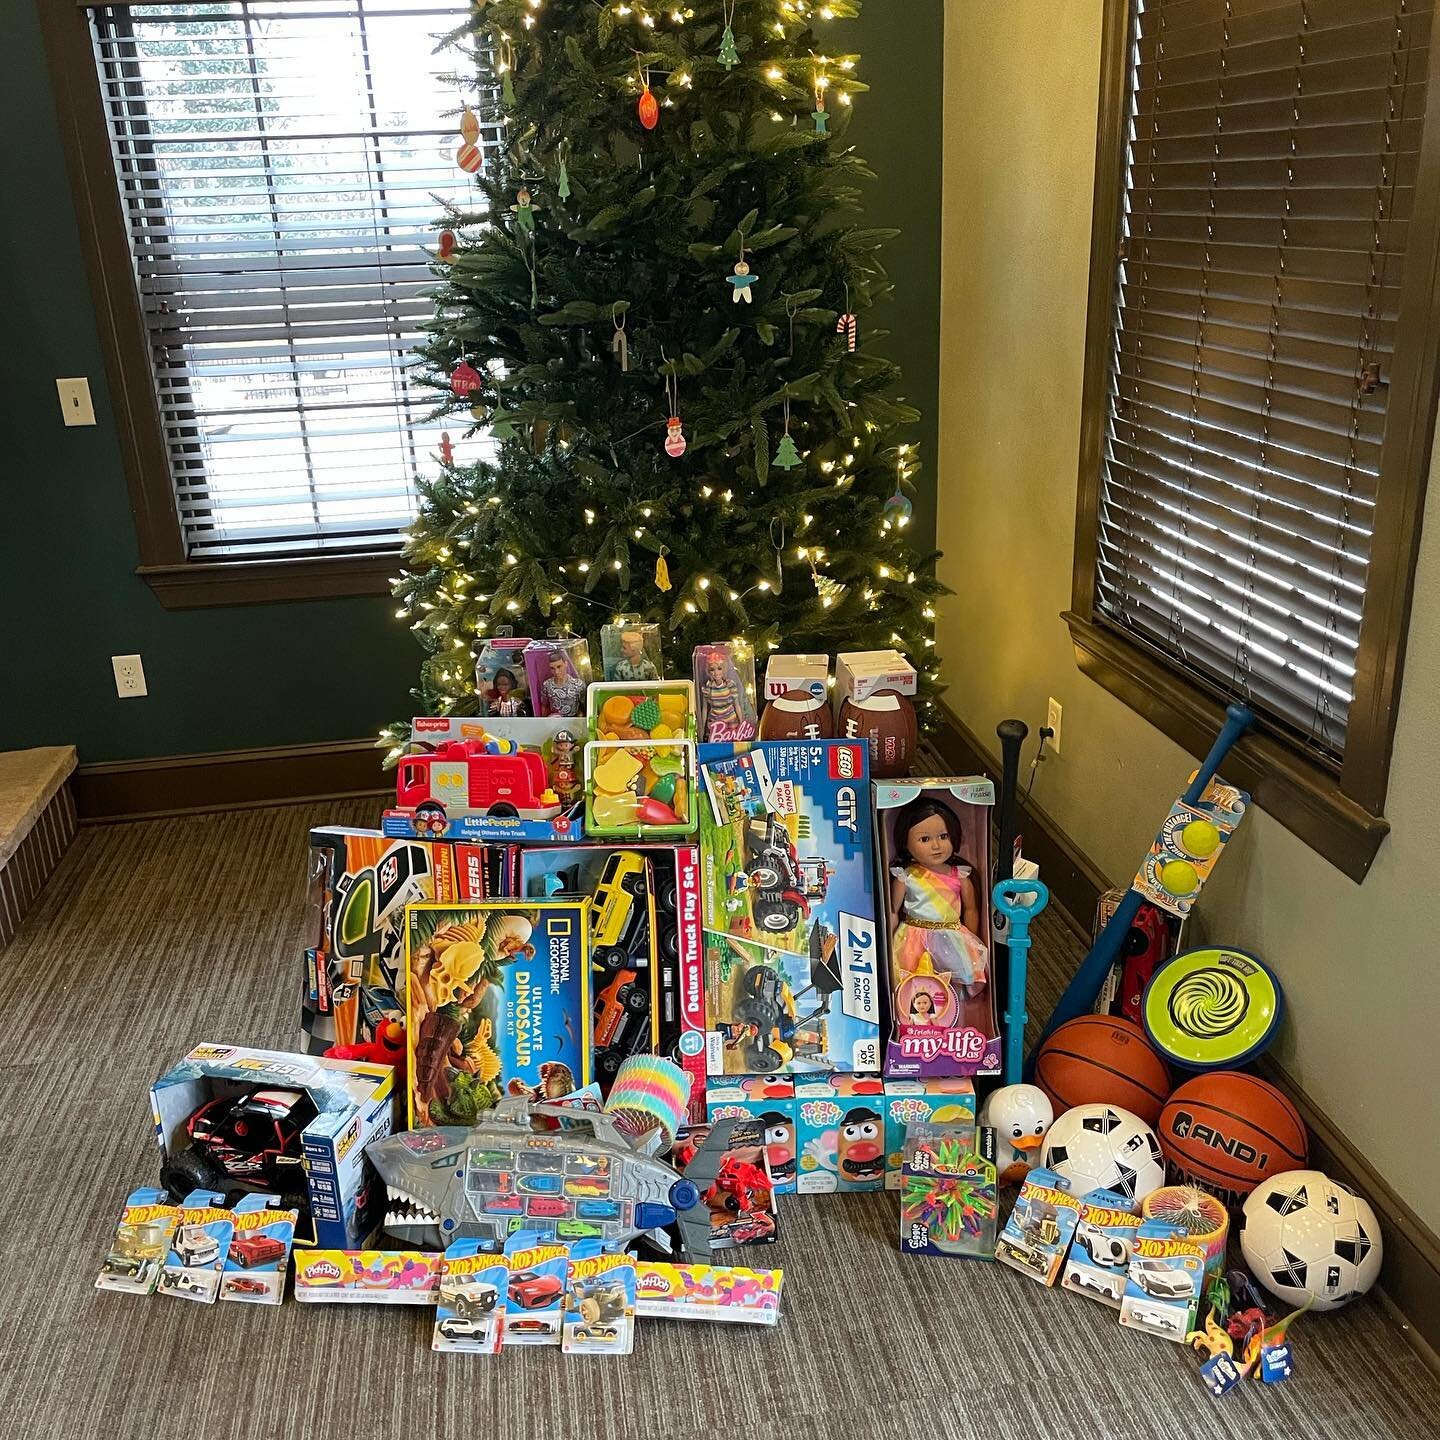 Toys for Tots was a success! After fundraising all winter, we were able to donate close to $500 of toys for kids in our local community. Thank you to everyone who donated!